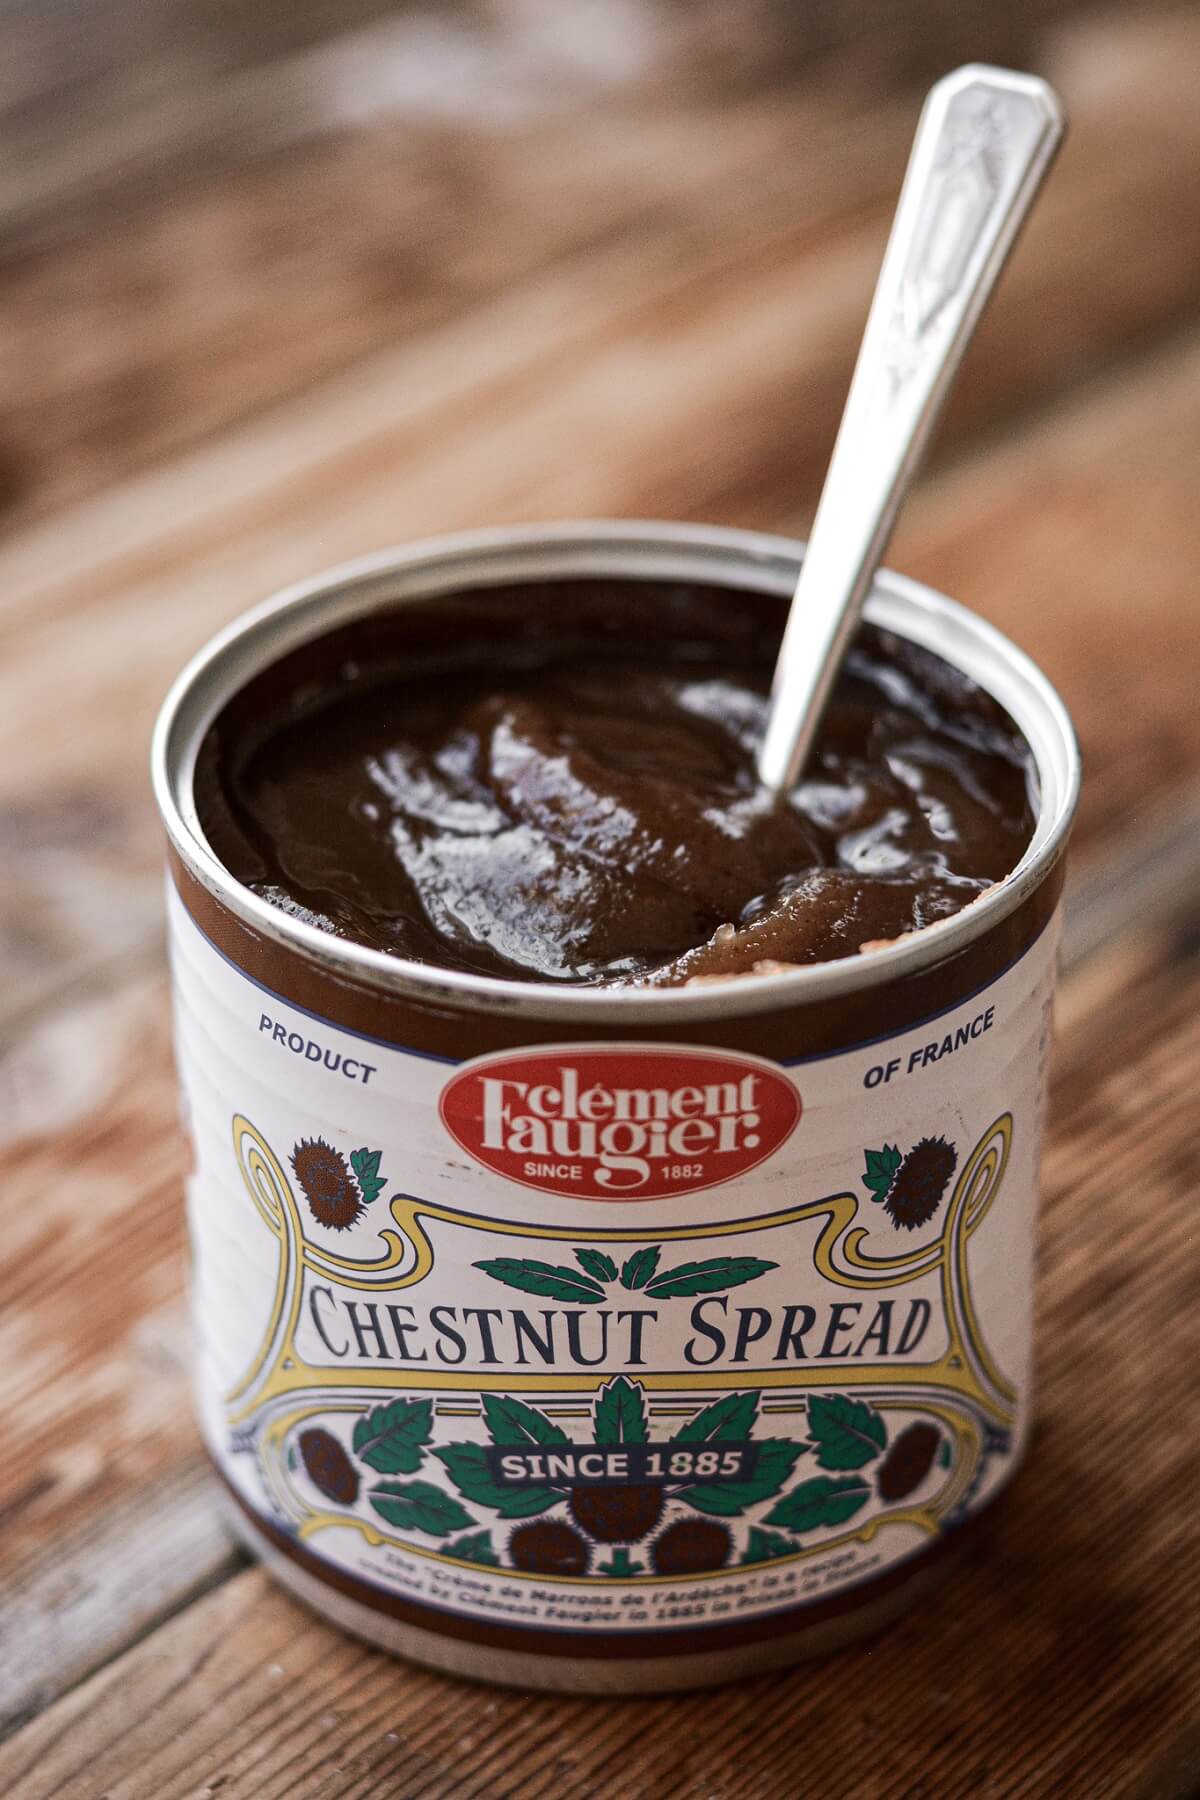 Can of chestnut spread.